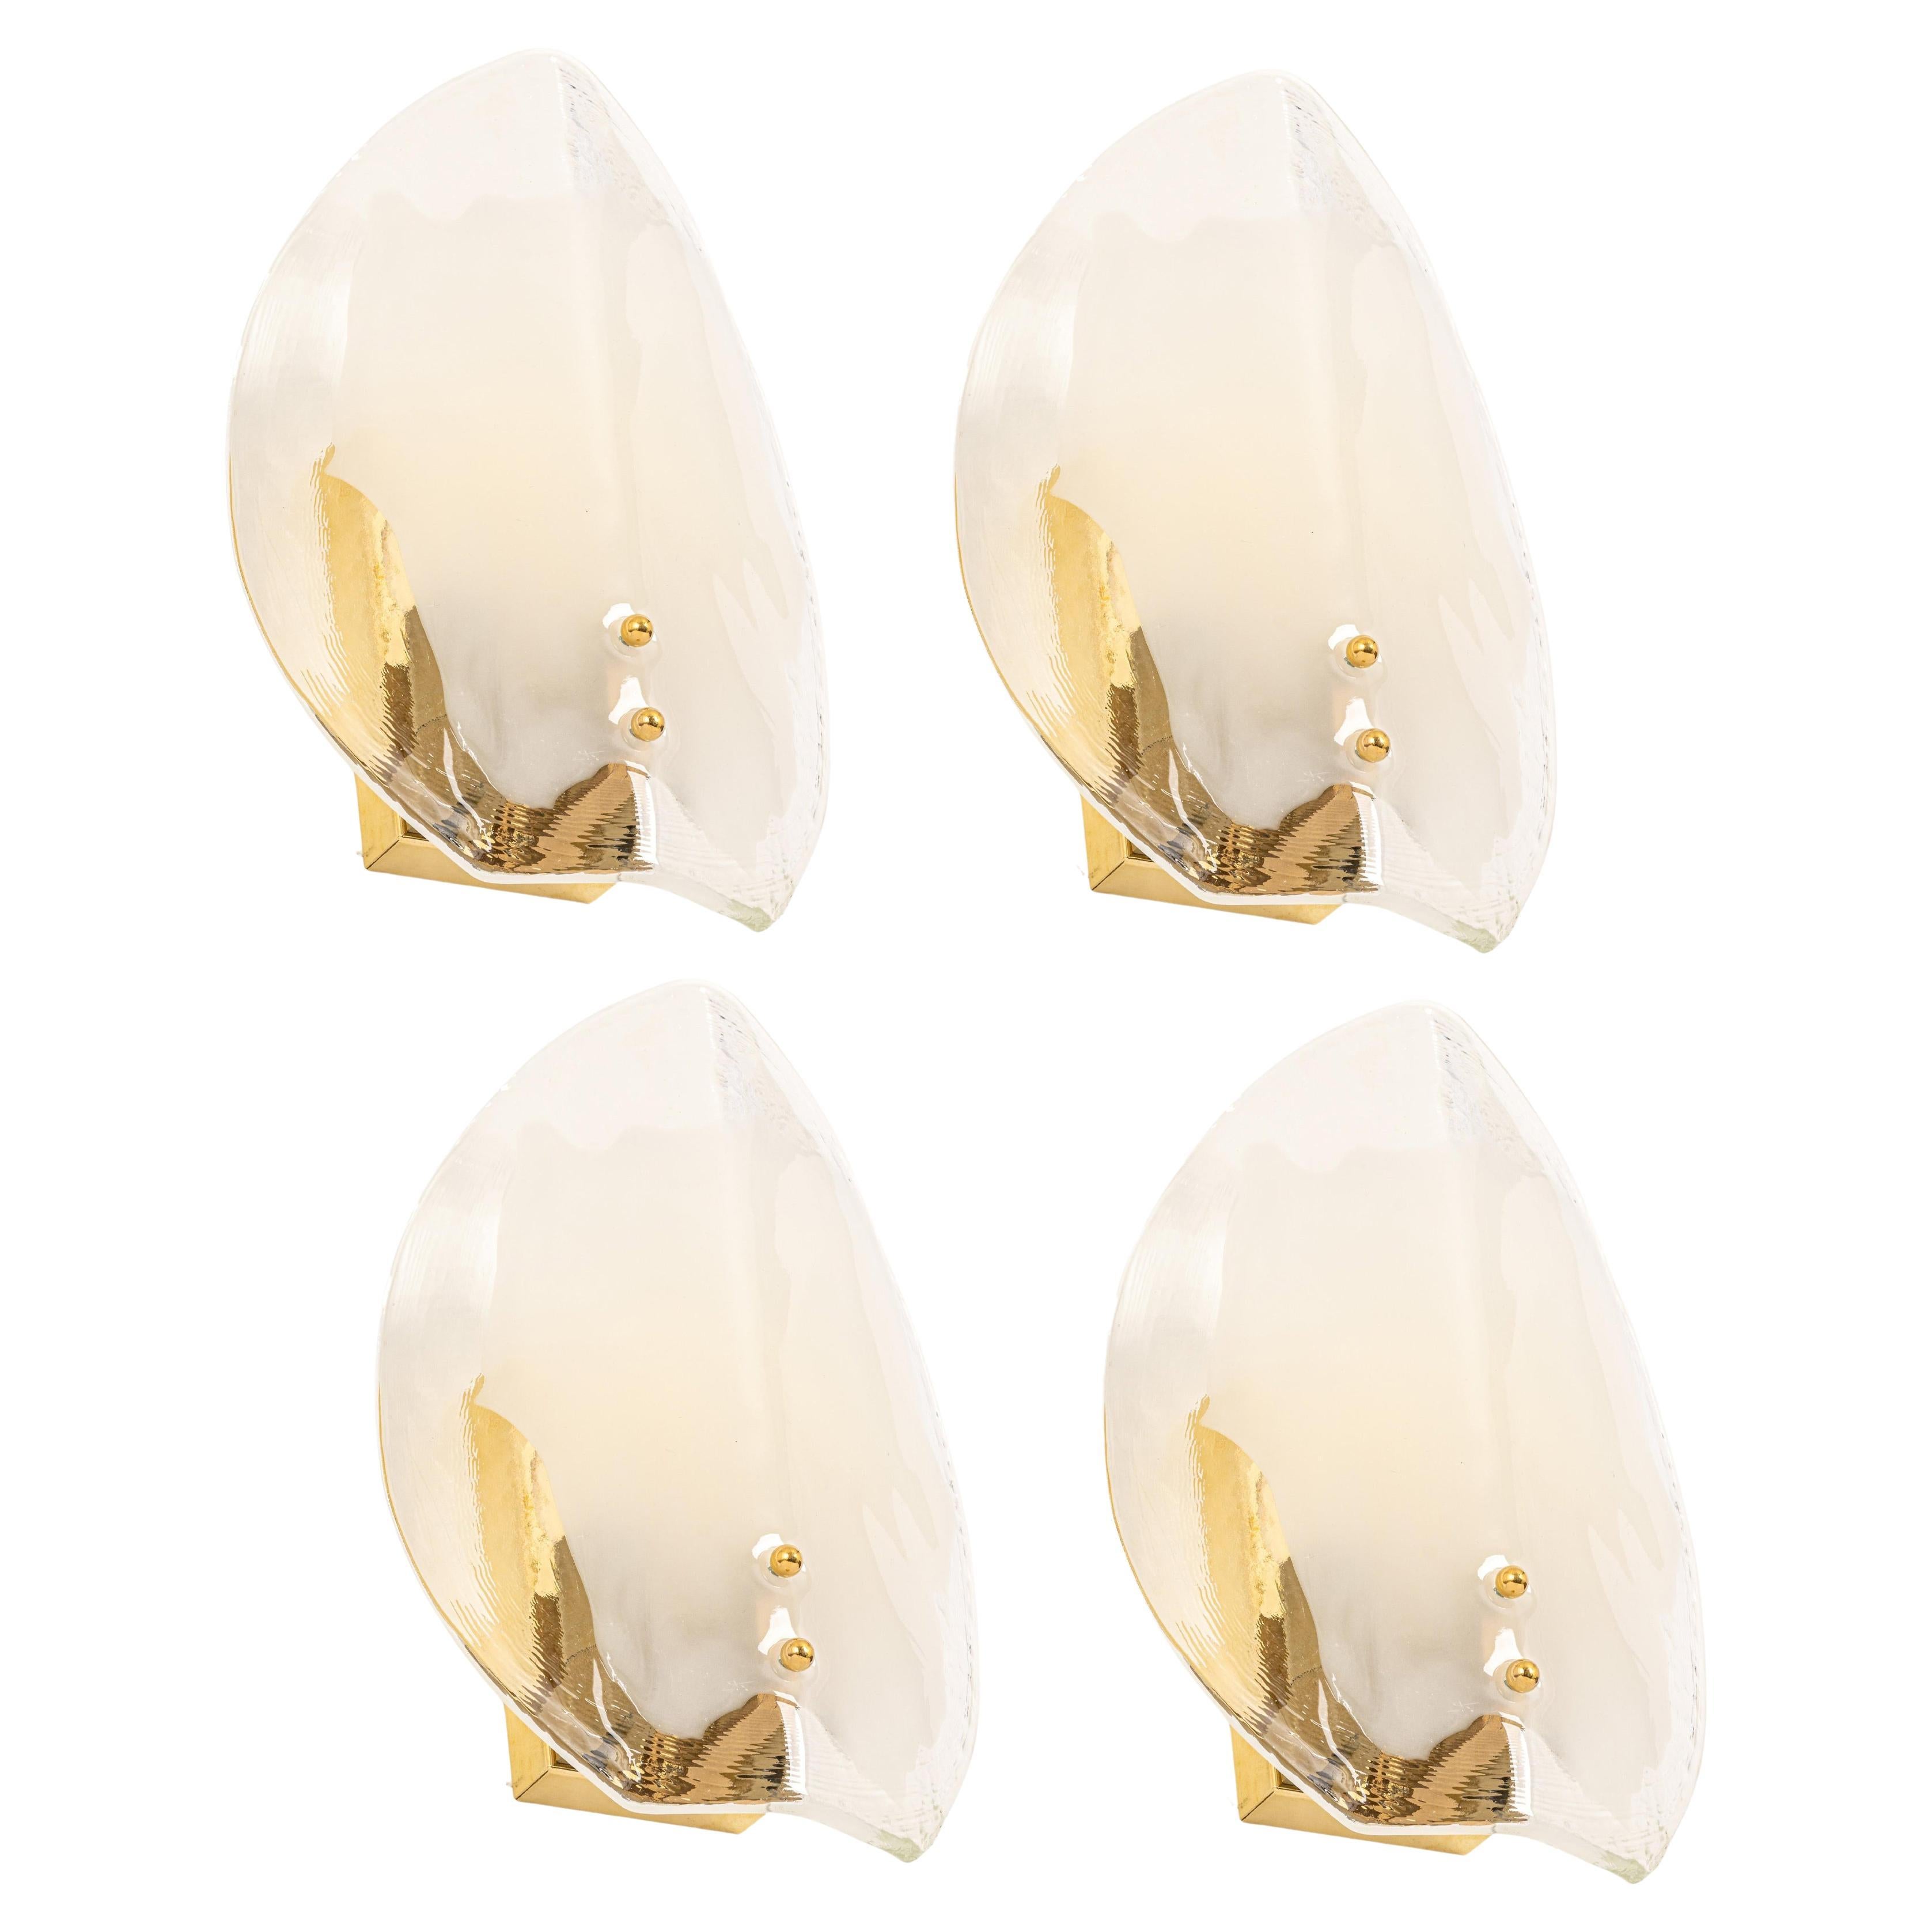 1 of 2 Pairs of Kalmar Brass & Murano Glass Sconces Wall Lights, Austria, 1970s For Sale